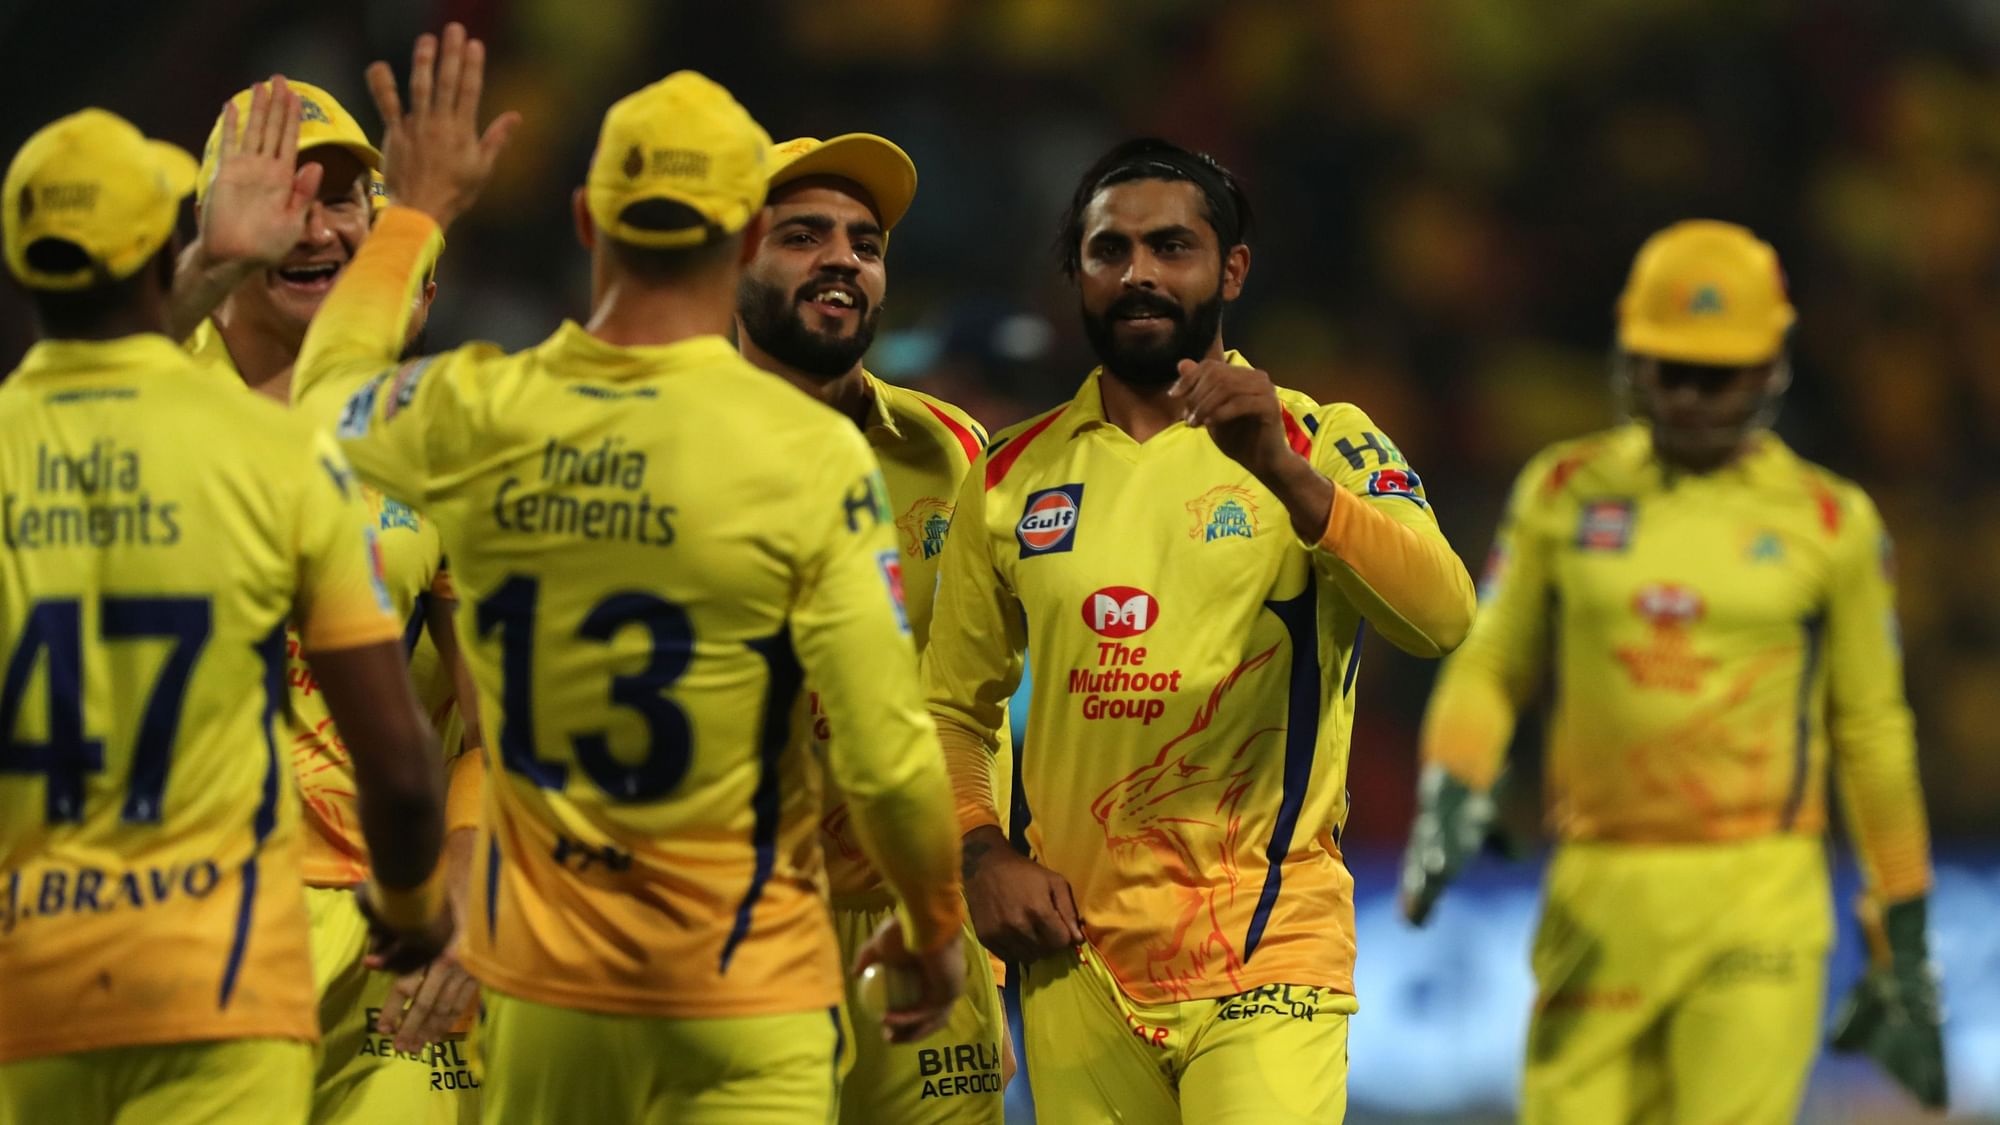 Ravindra Jadeja of Chennai Super Kings celebrates wicket of Ab De Villiers of Royal Challengers Banglore  in Bengaluru on the 21st April 2019